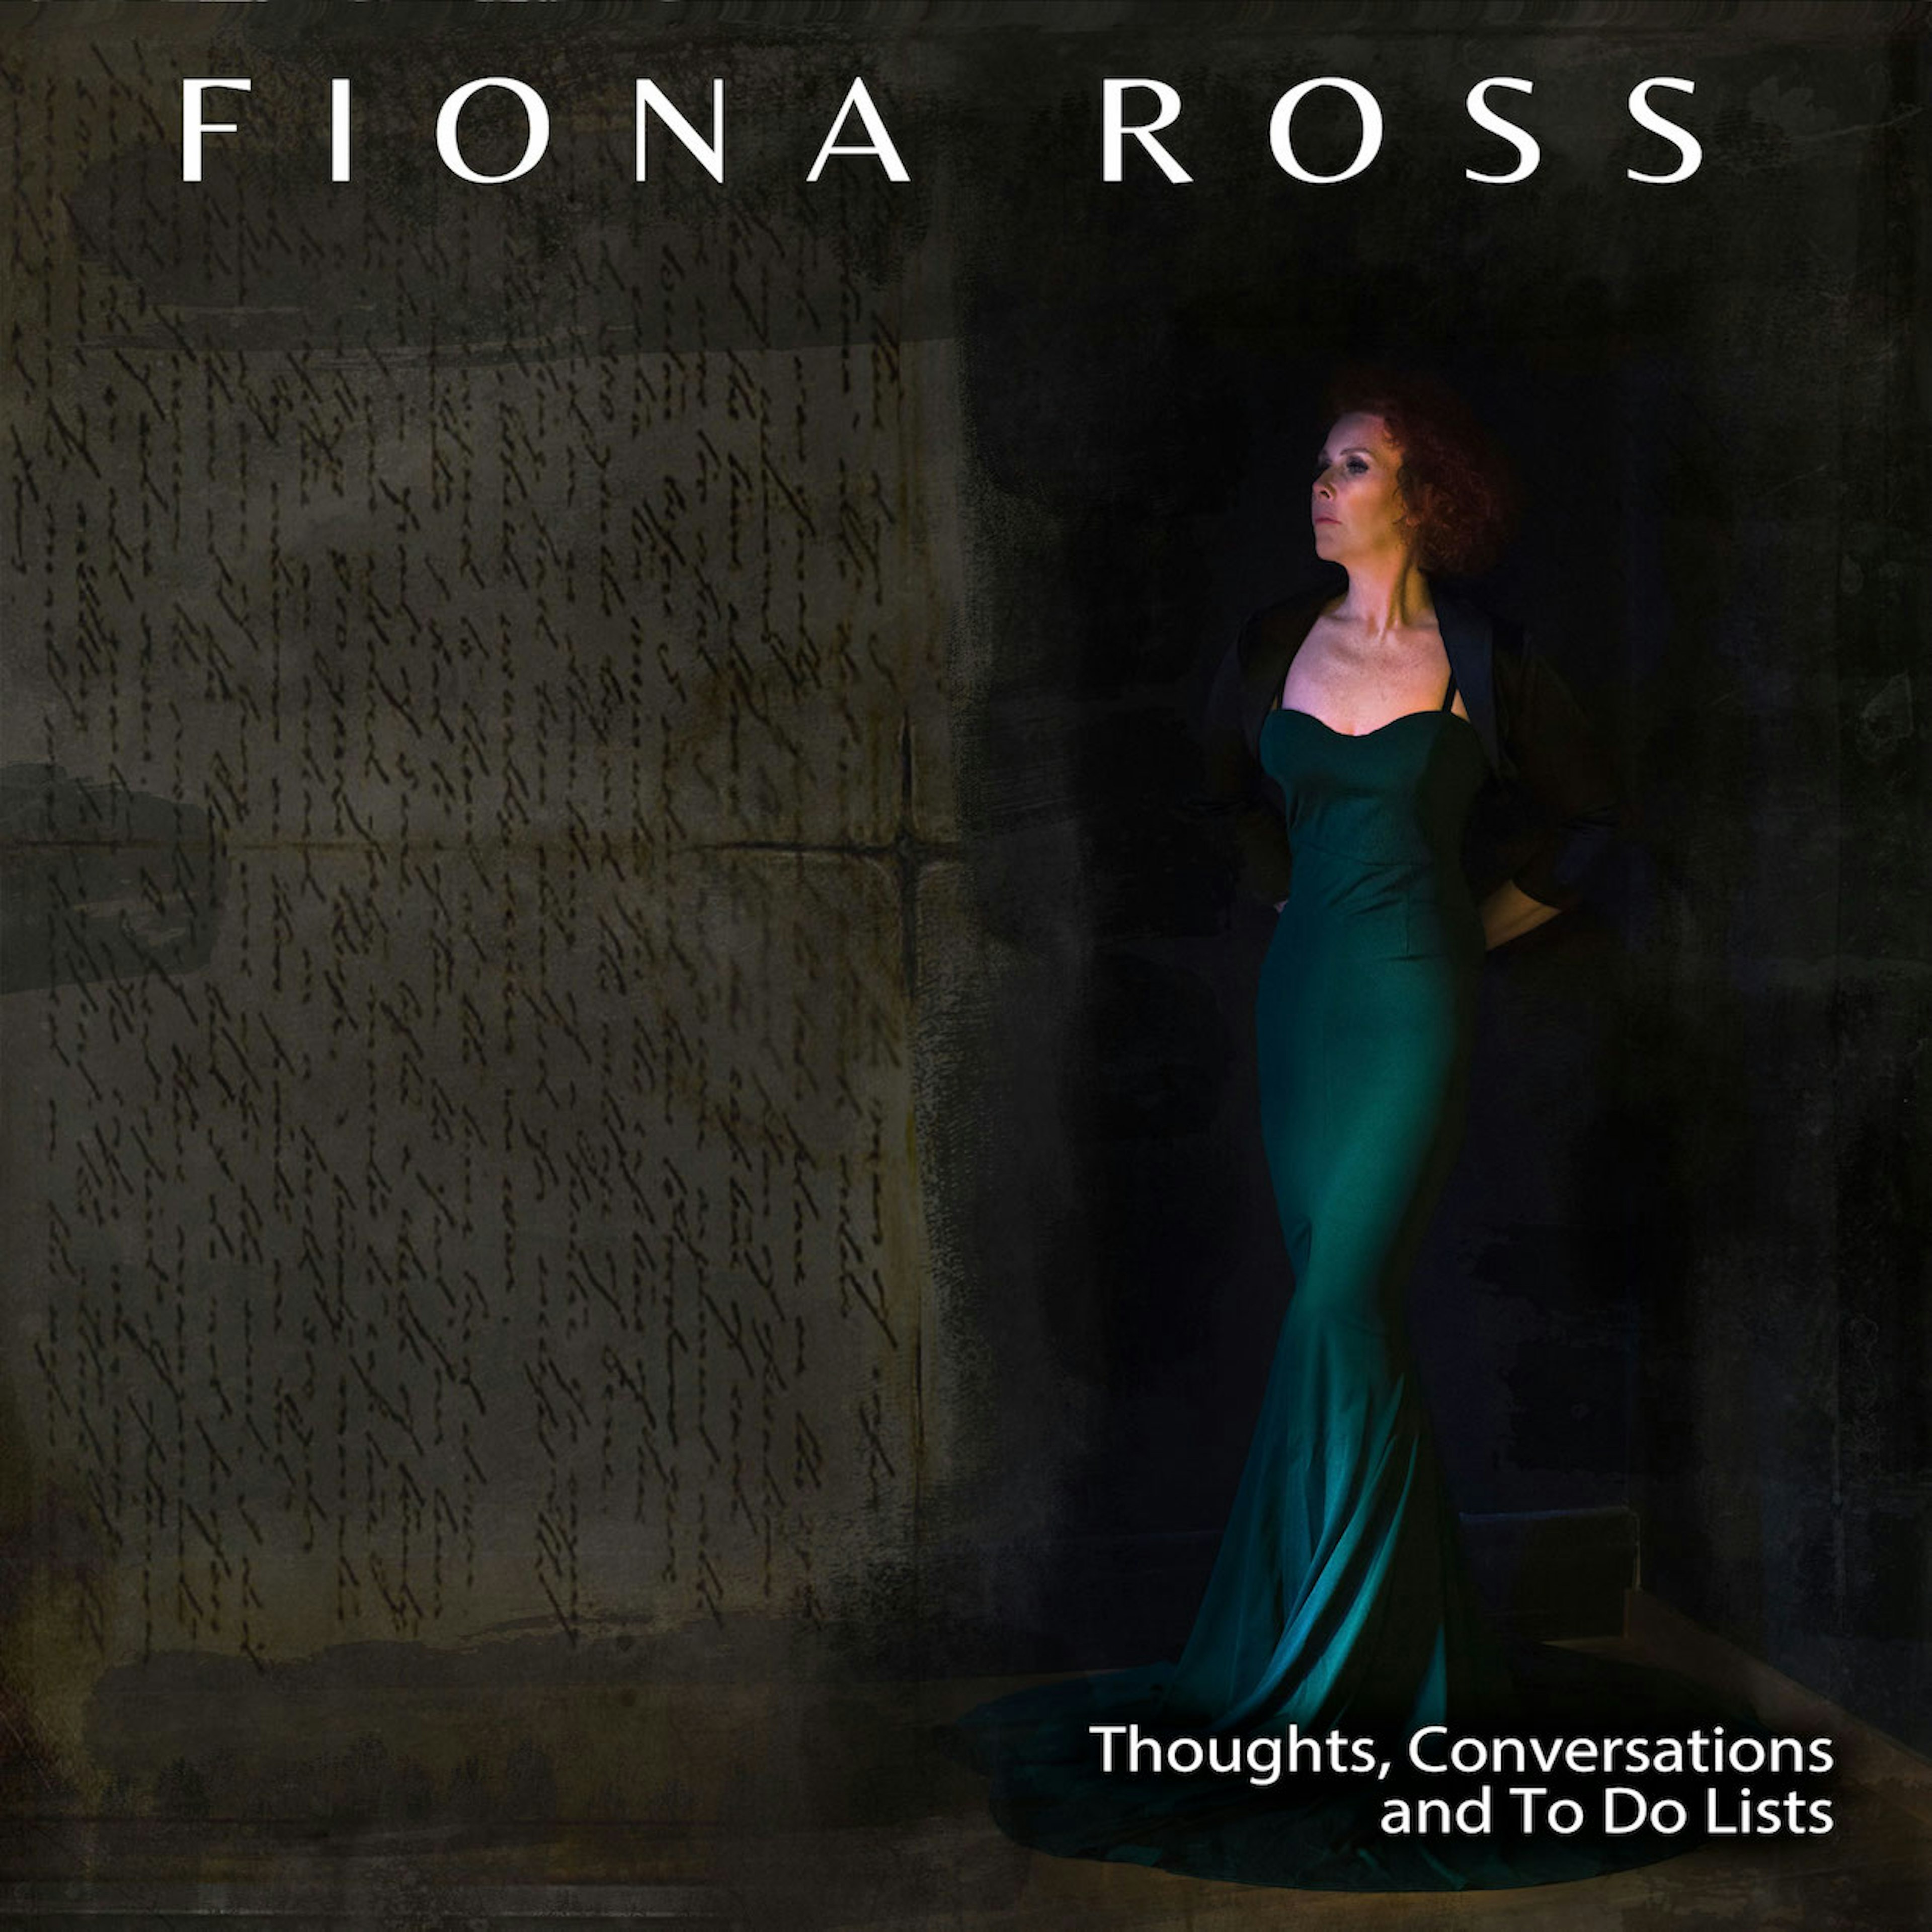 Fiona Ross - Thoughts, Conversations and To Do Lists